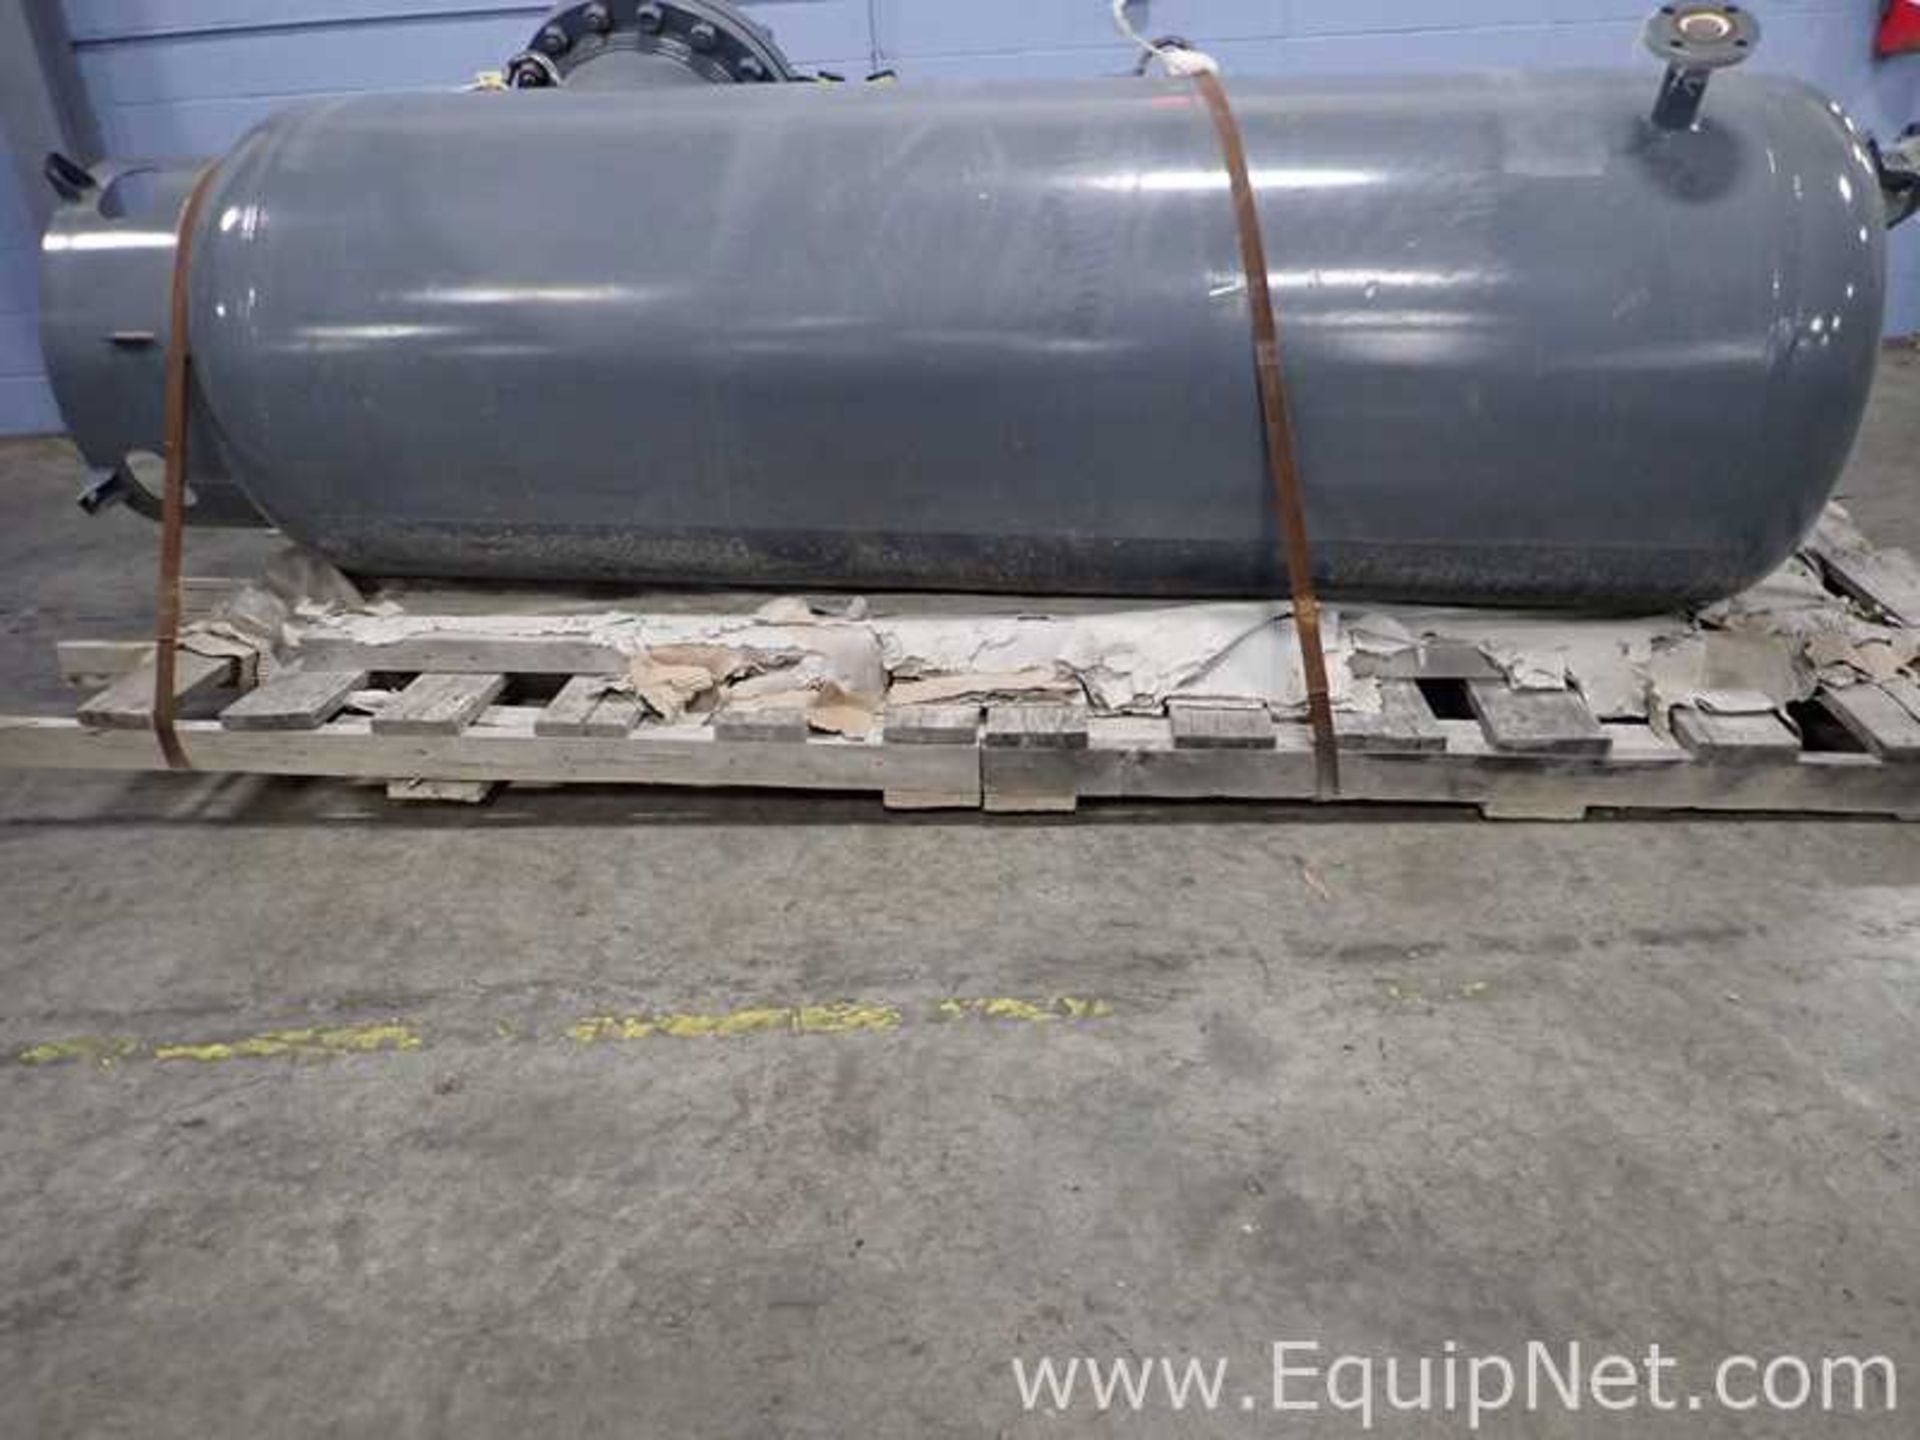 EQUIPNET LISTING #765750; REMOVAL COST: $40; DESCRIPTION: Steel Fab Carbon Steel Receiving Tank